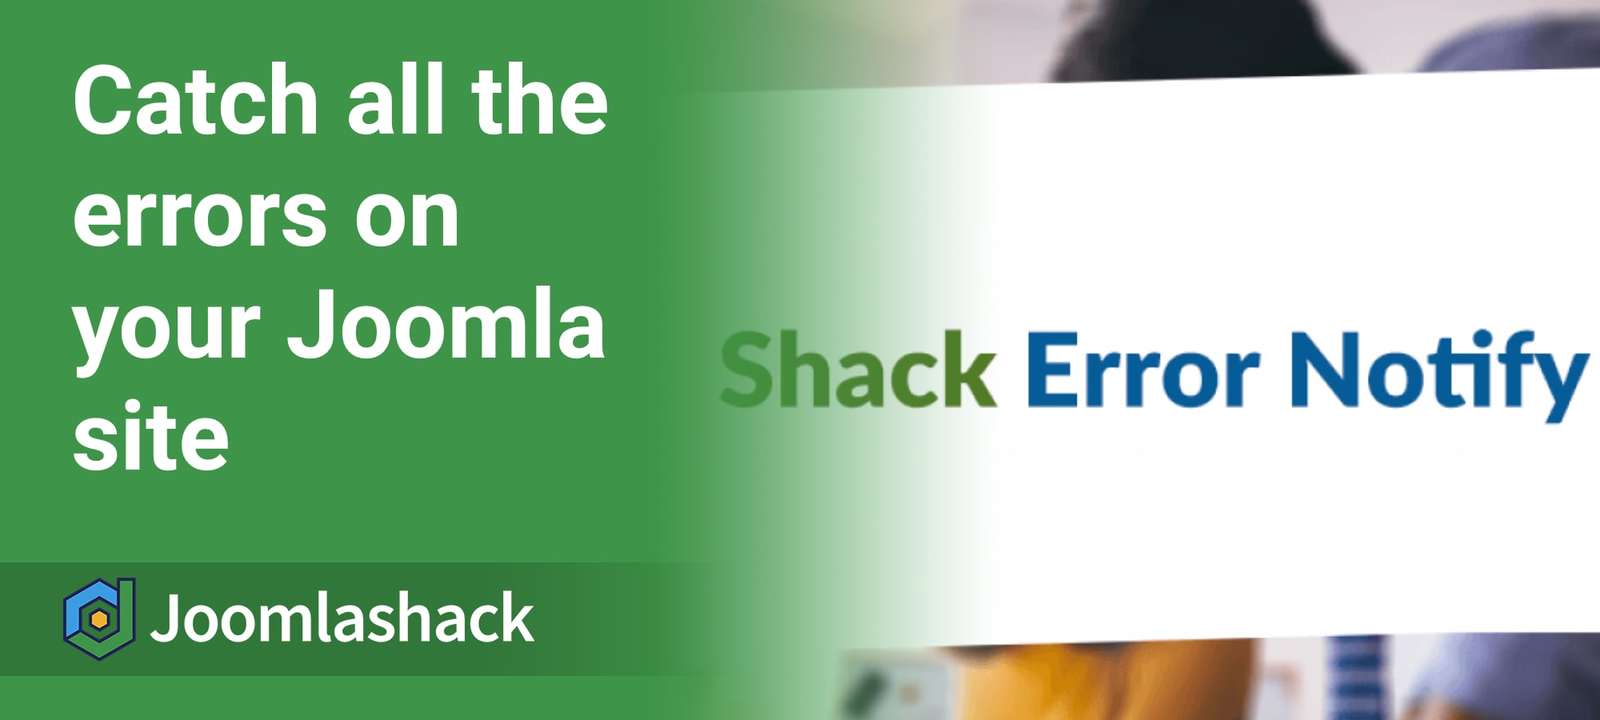 How to Catch Every Important Error on Your Joomla Site